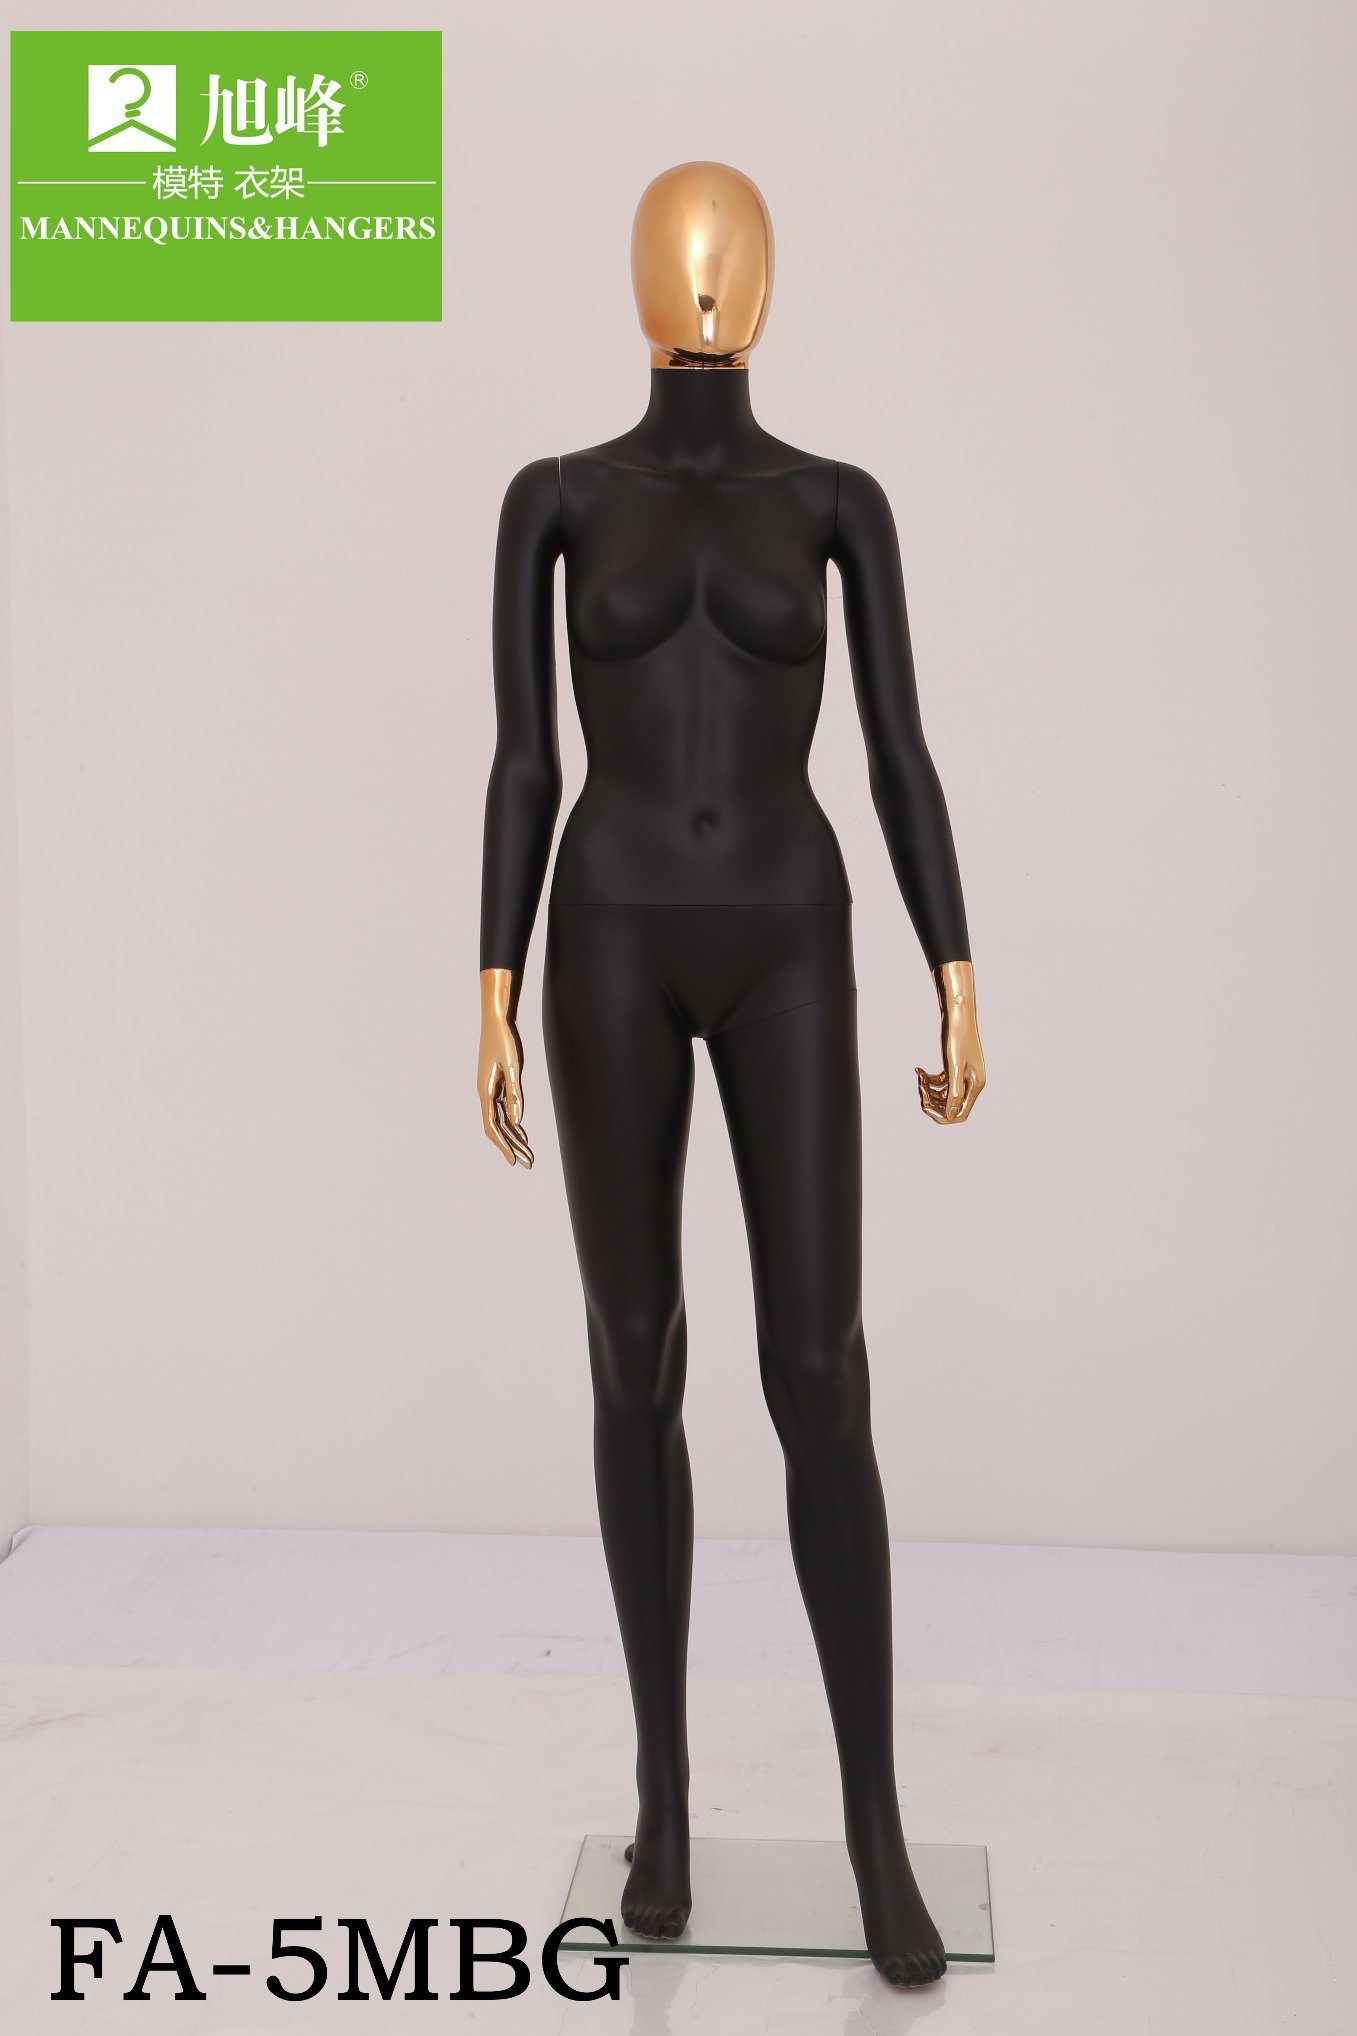 Xufeng Factory Produce Free Mannequins